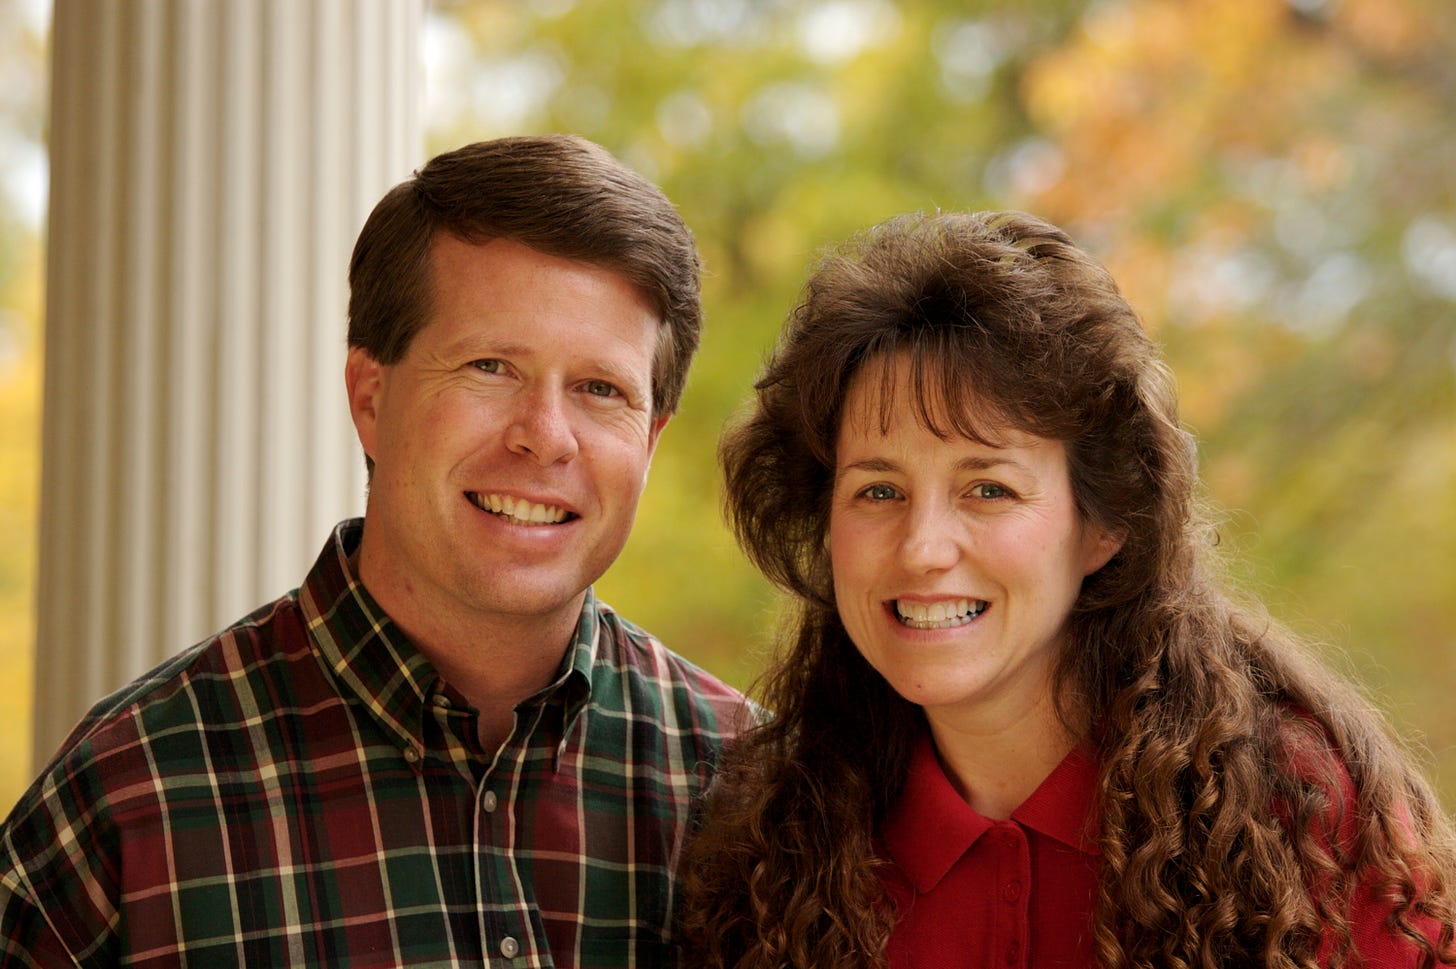 This is a wikipedia photo of Jim Bob and Michelle Duggar, probably several years old at this point. They're outside with blurry trees in the background and standing in front of an off-white column of some sort. They're both white people with brown hair in case you didn't know, and they're both smiling with very old-fashioned hair. Michelle is wear some sort of red collared dress and Jim Bob is wearing a green, red, and yellow plaid button-down shirt. they suck